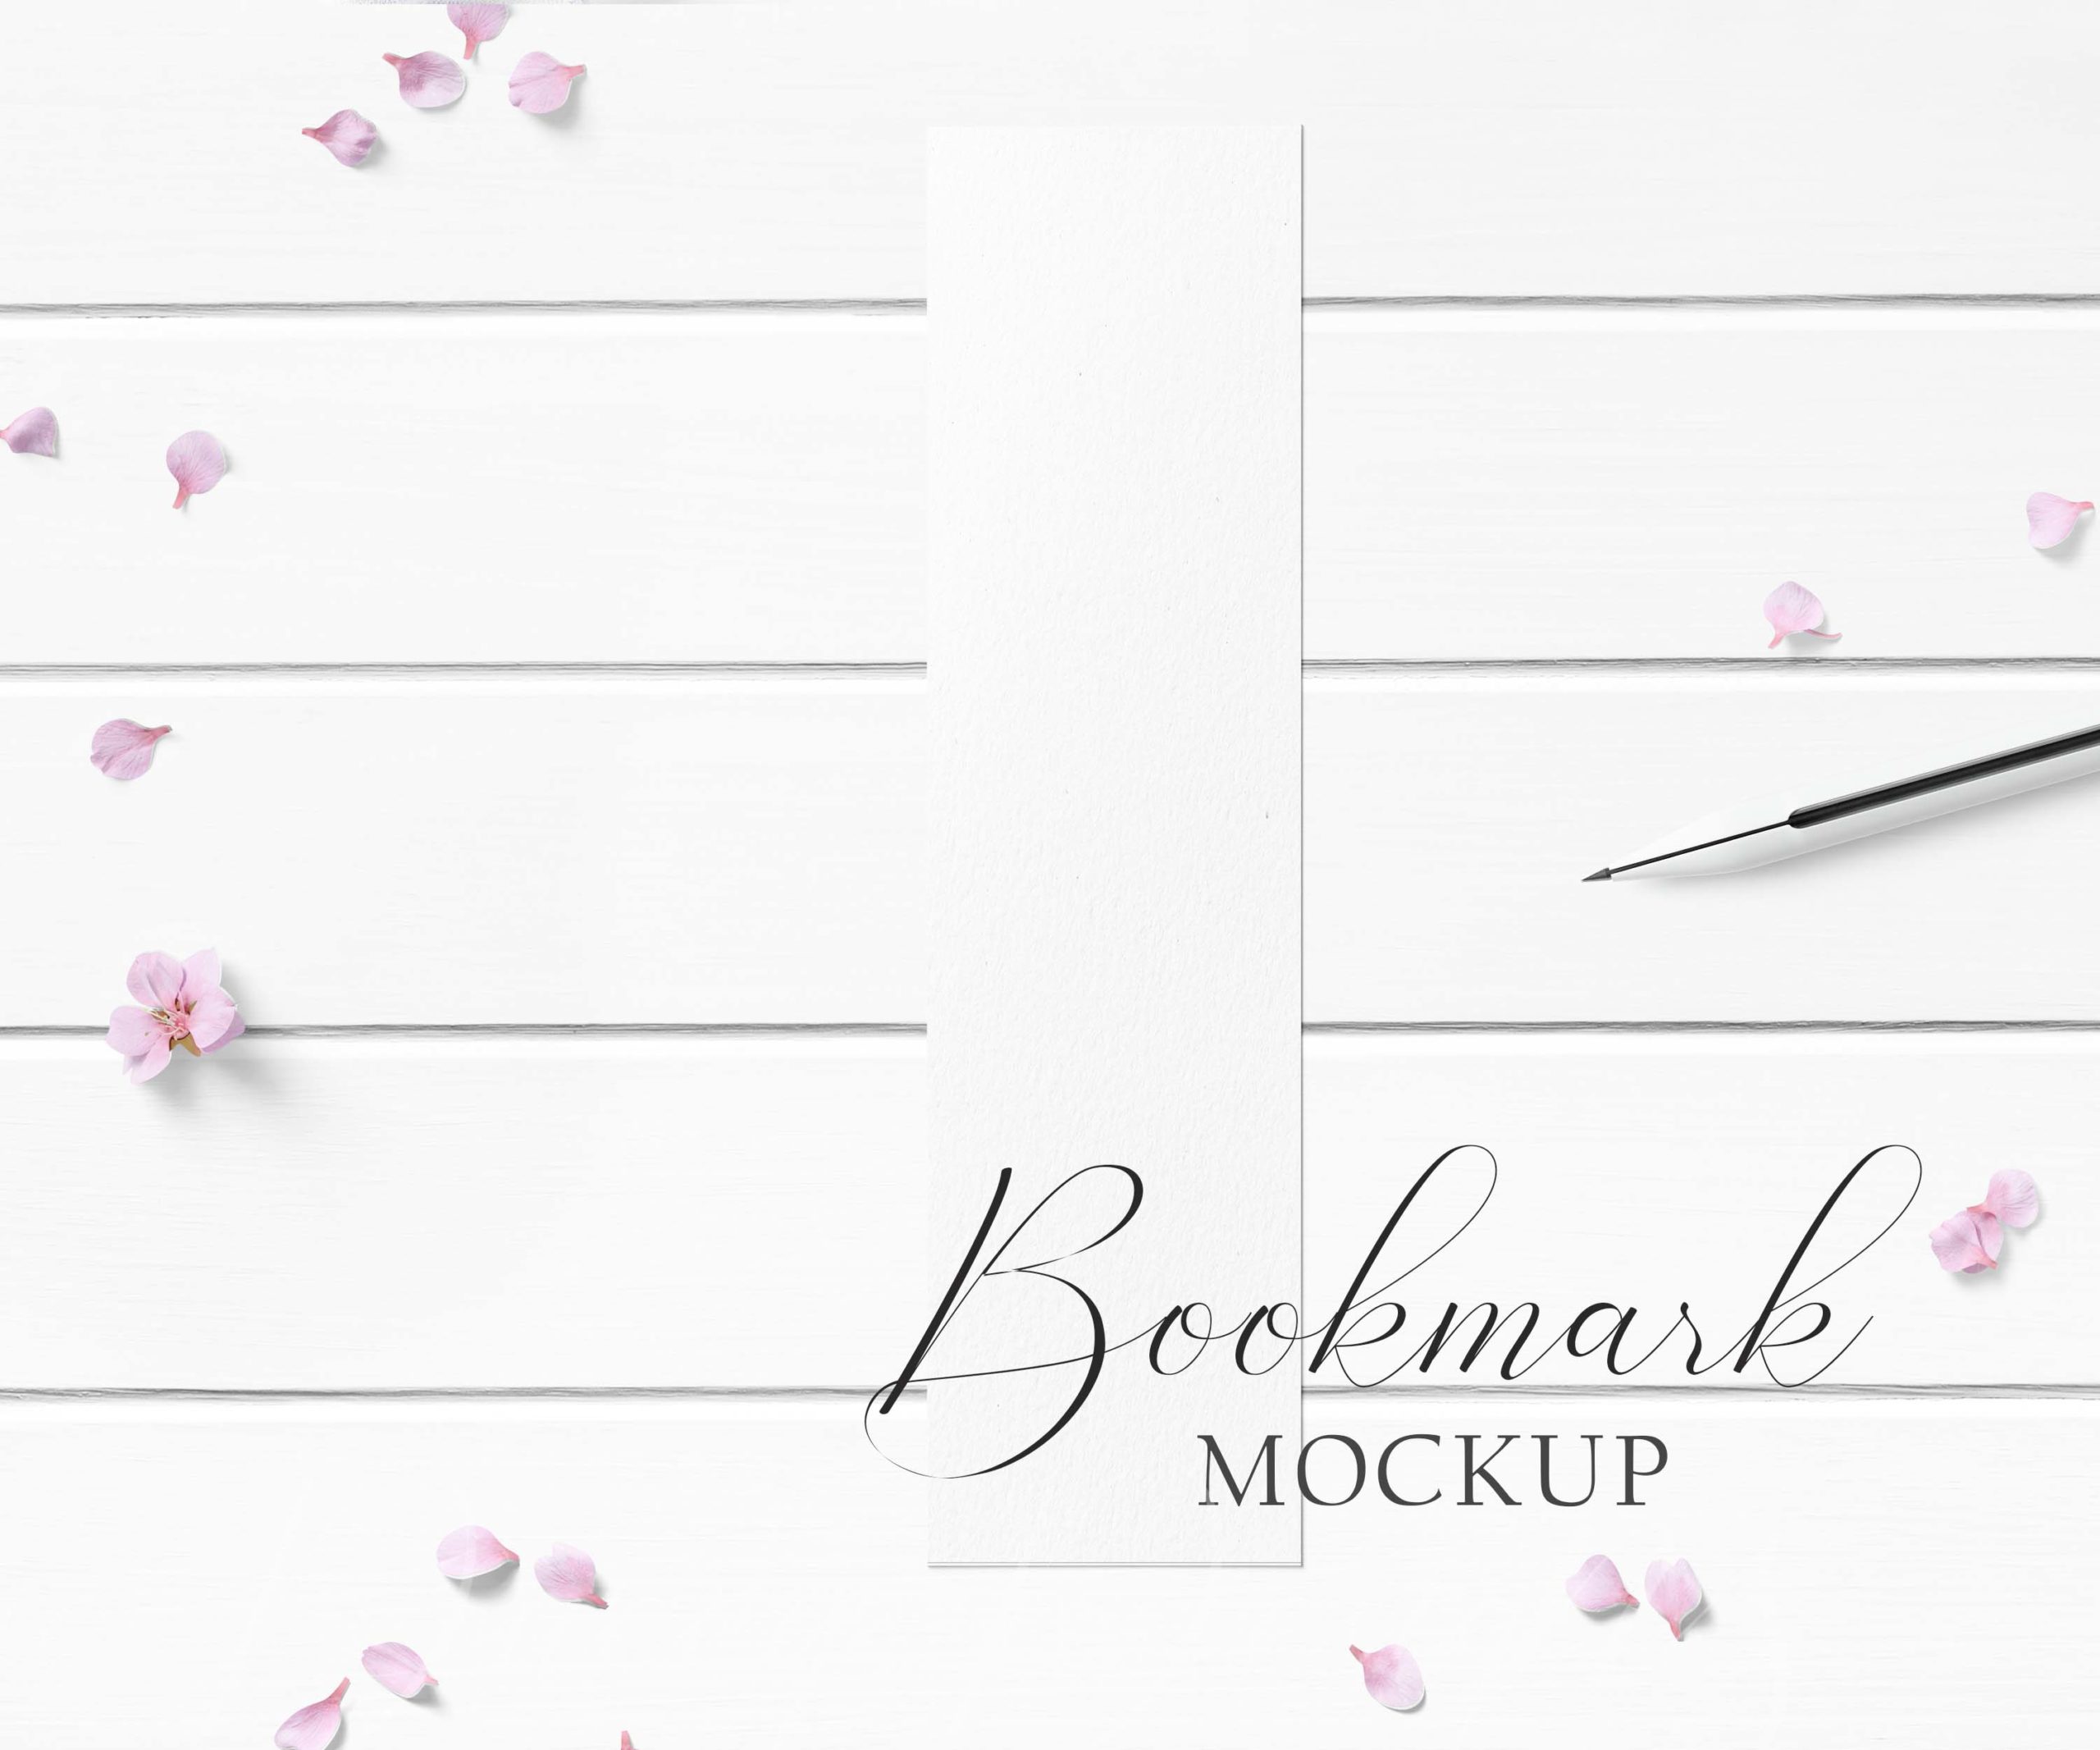 Download 2 8 Bookmark Mockup Styled With Textured Paper And Pink Flowers On A White Wood Background Natalie Ducey